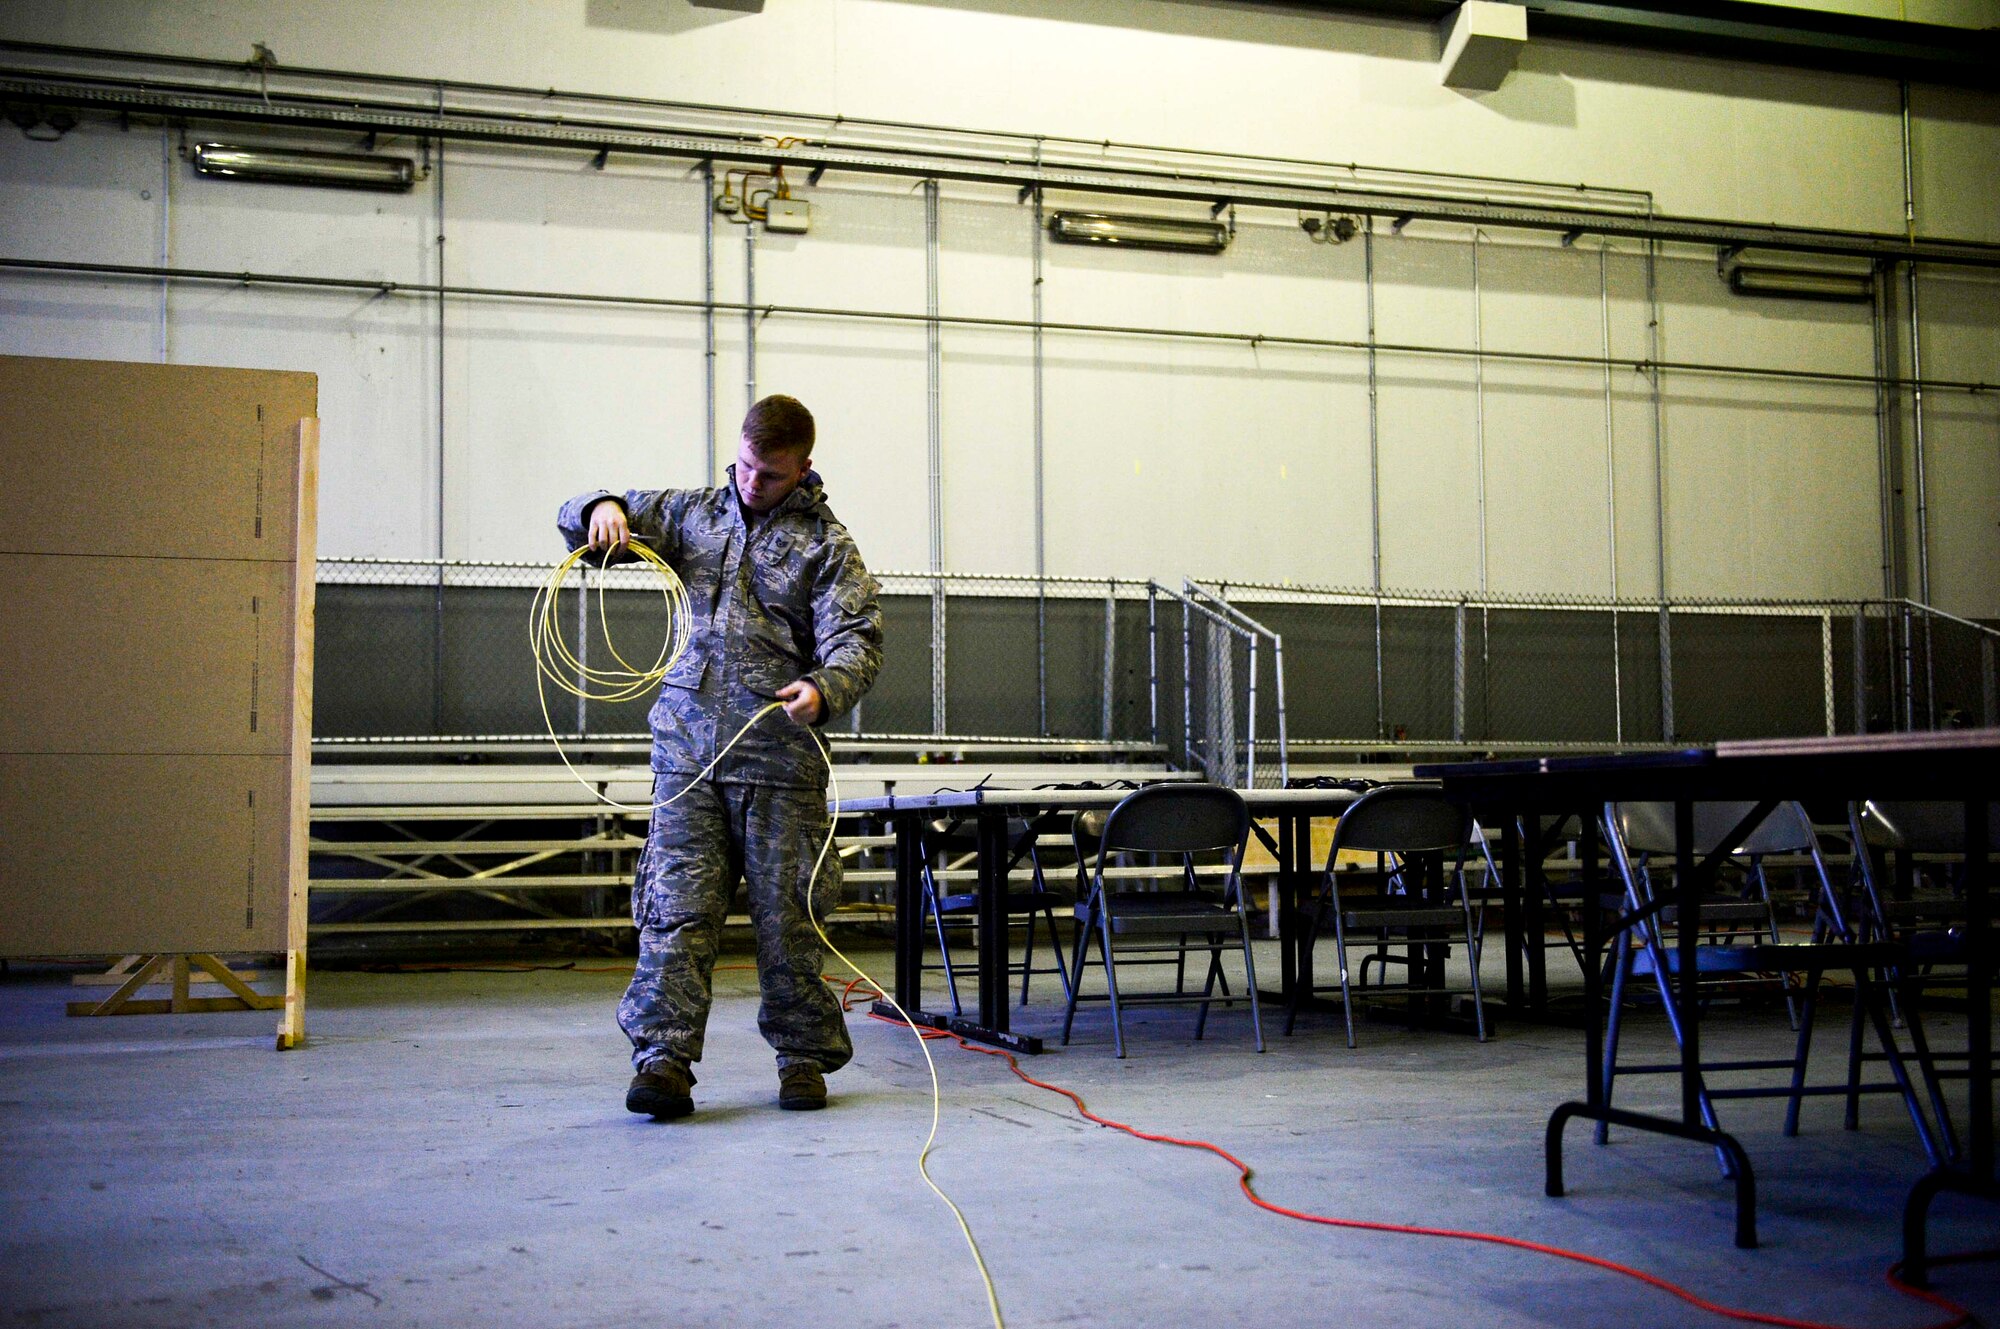 U.S. Air Force Staff Sgt. Jesse Sargent, 1st Combat Communications squadron tactical network operator, measures a chord to make a cable during an exercise on Rhine Ordnance Barracks, Germany, Oct. 26, 2017. Participants in the training event emphasized competence in mission readiness, whether in exercises or real-world operations. (U.S. Air Force photo by Airman 1st Class Joshua Magbanua)